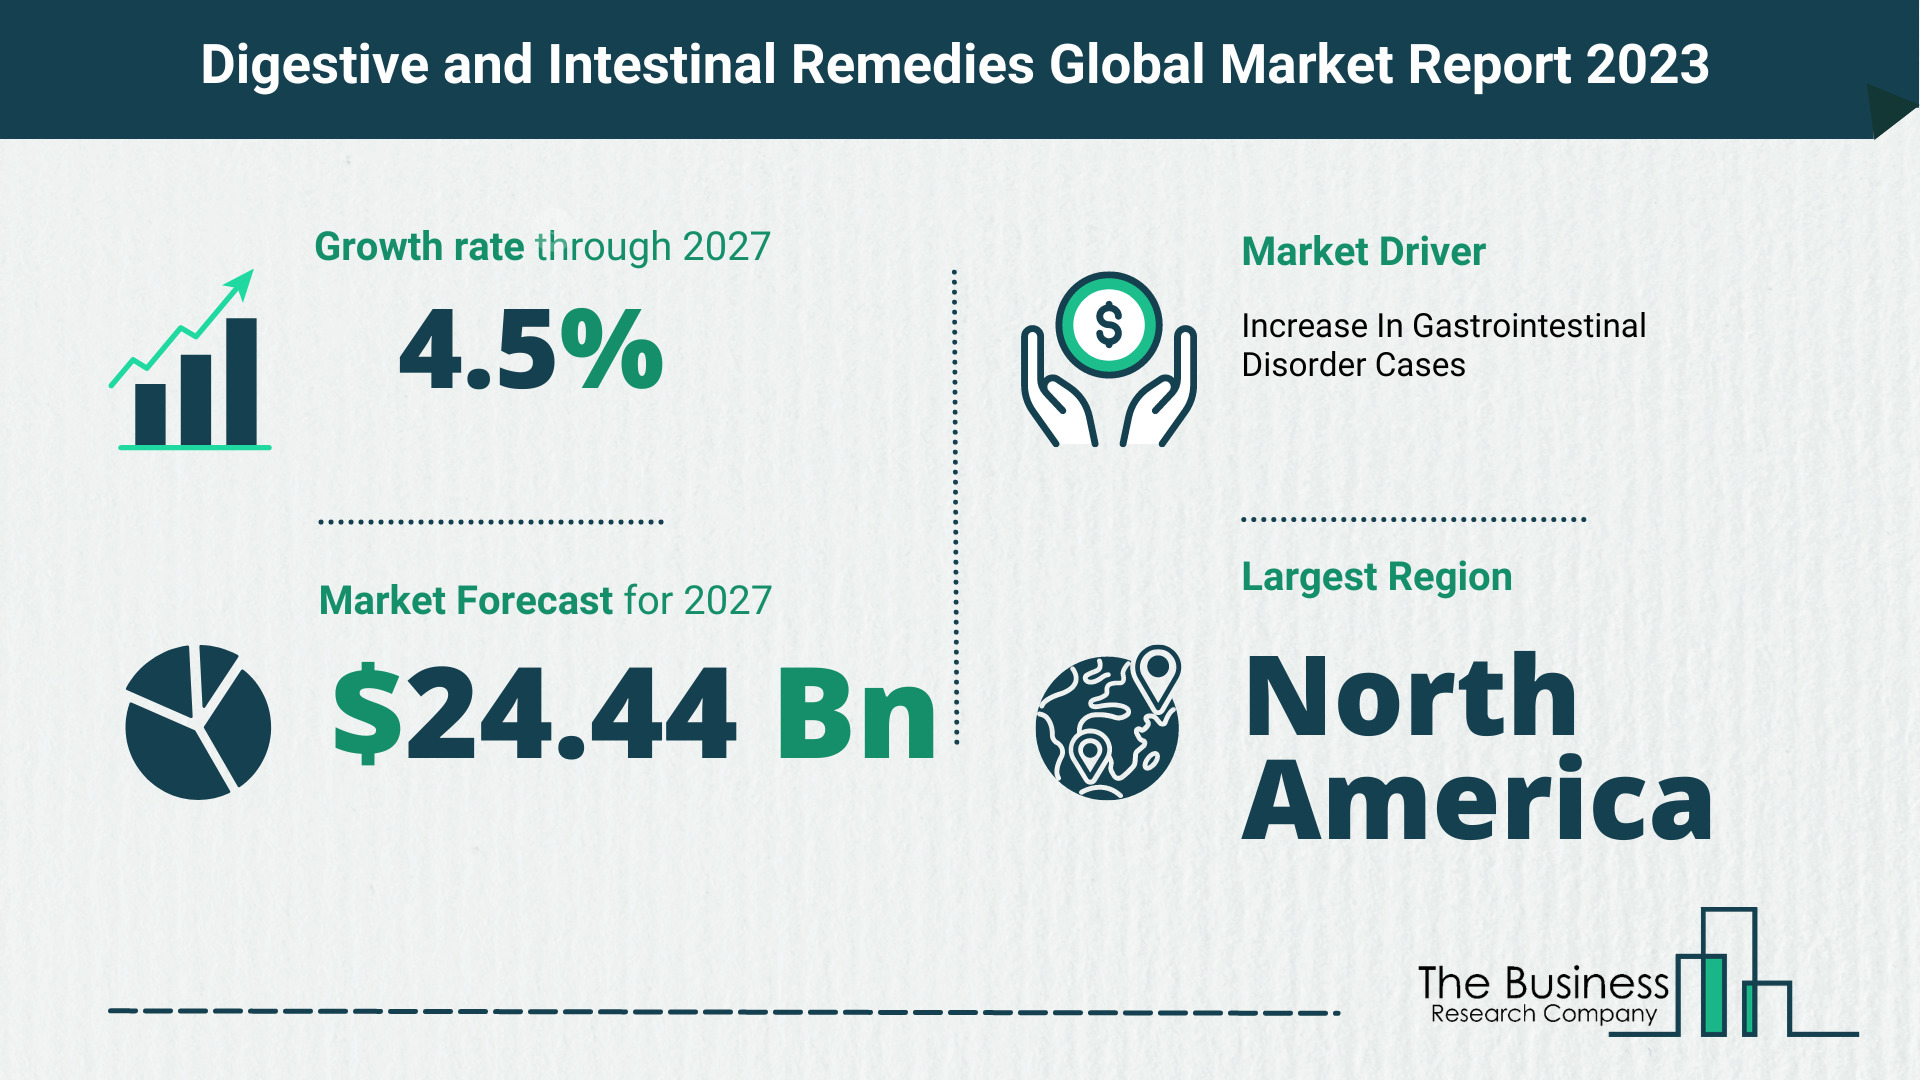 Global Digestive and Intestinal Remedies Market Size